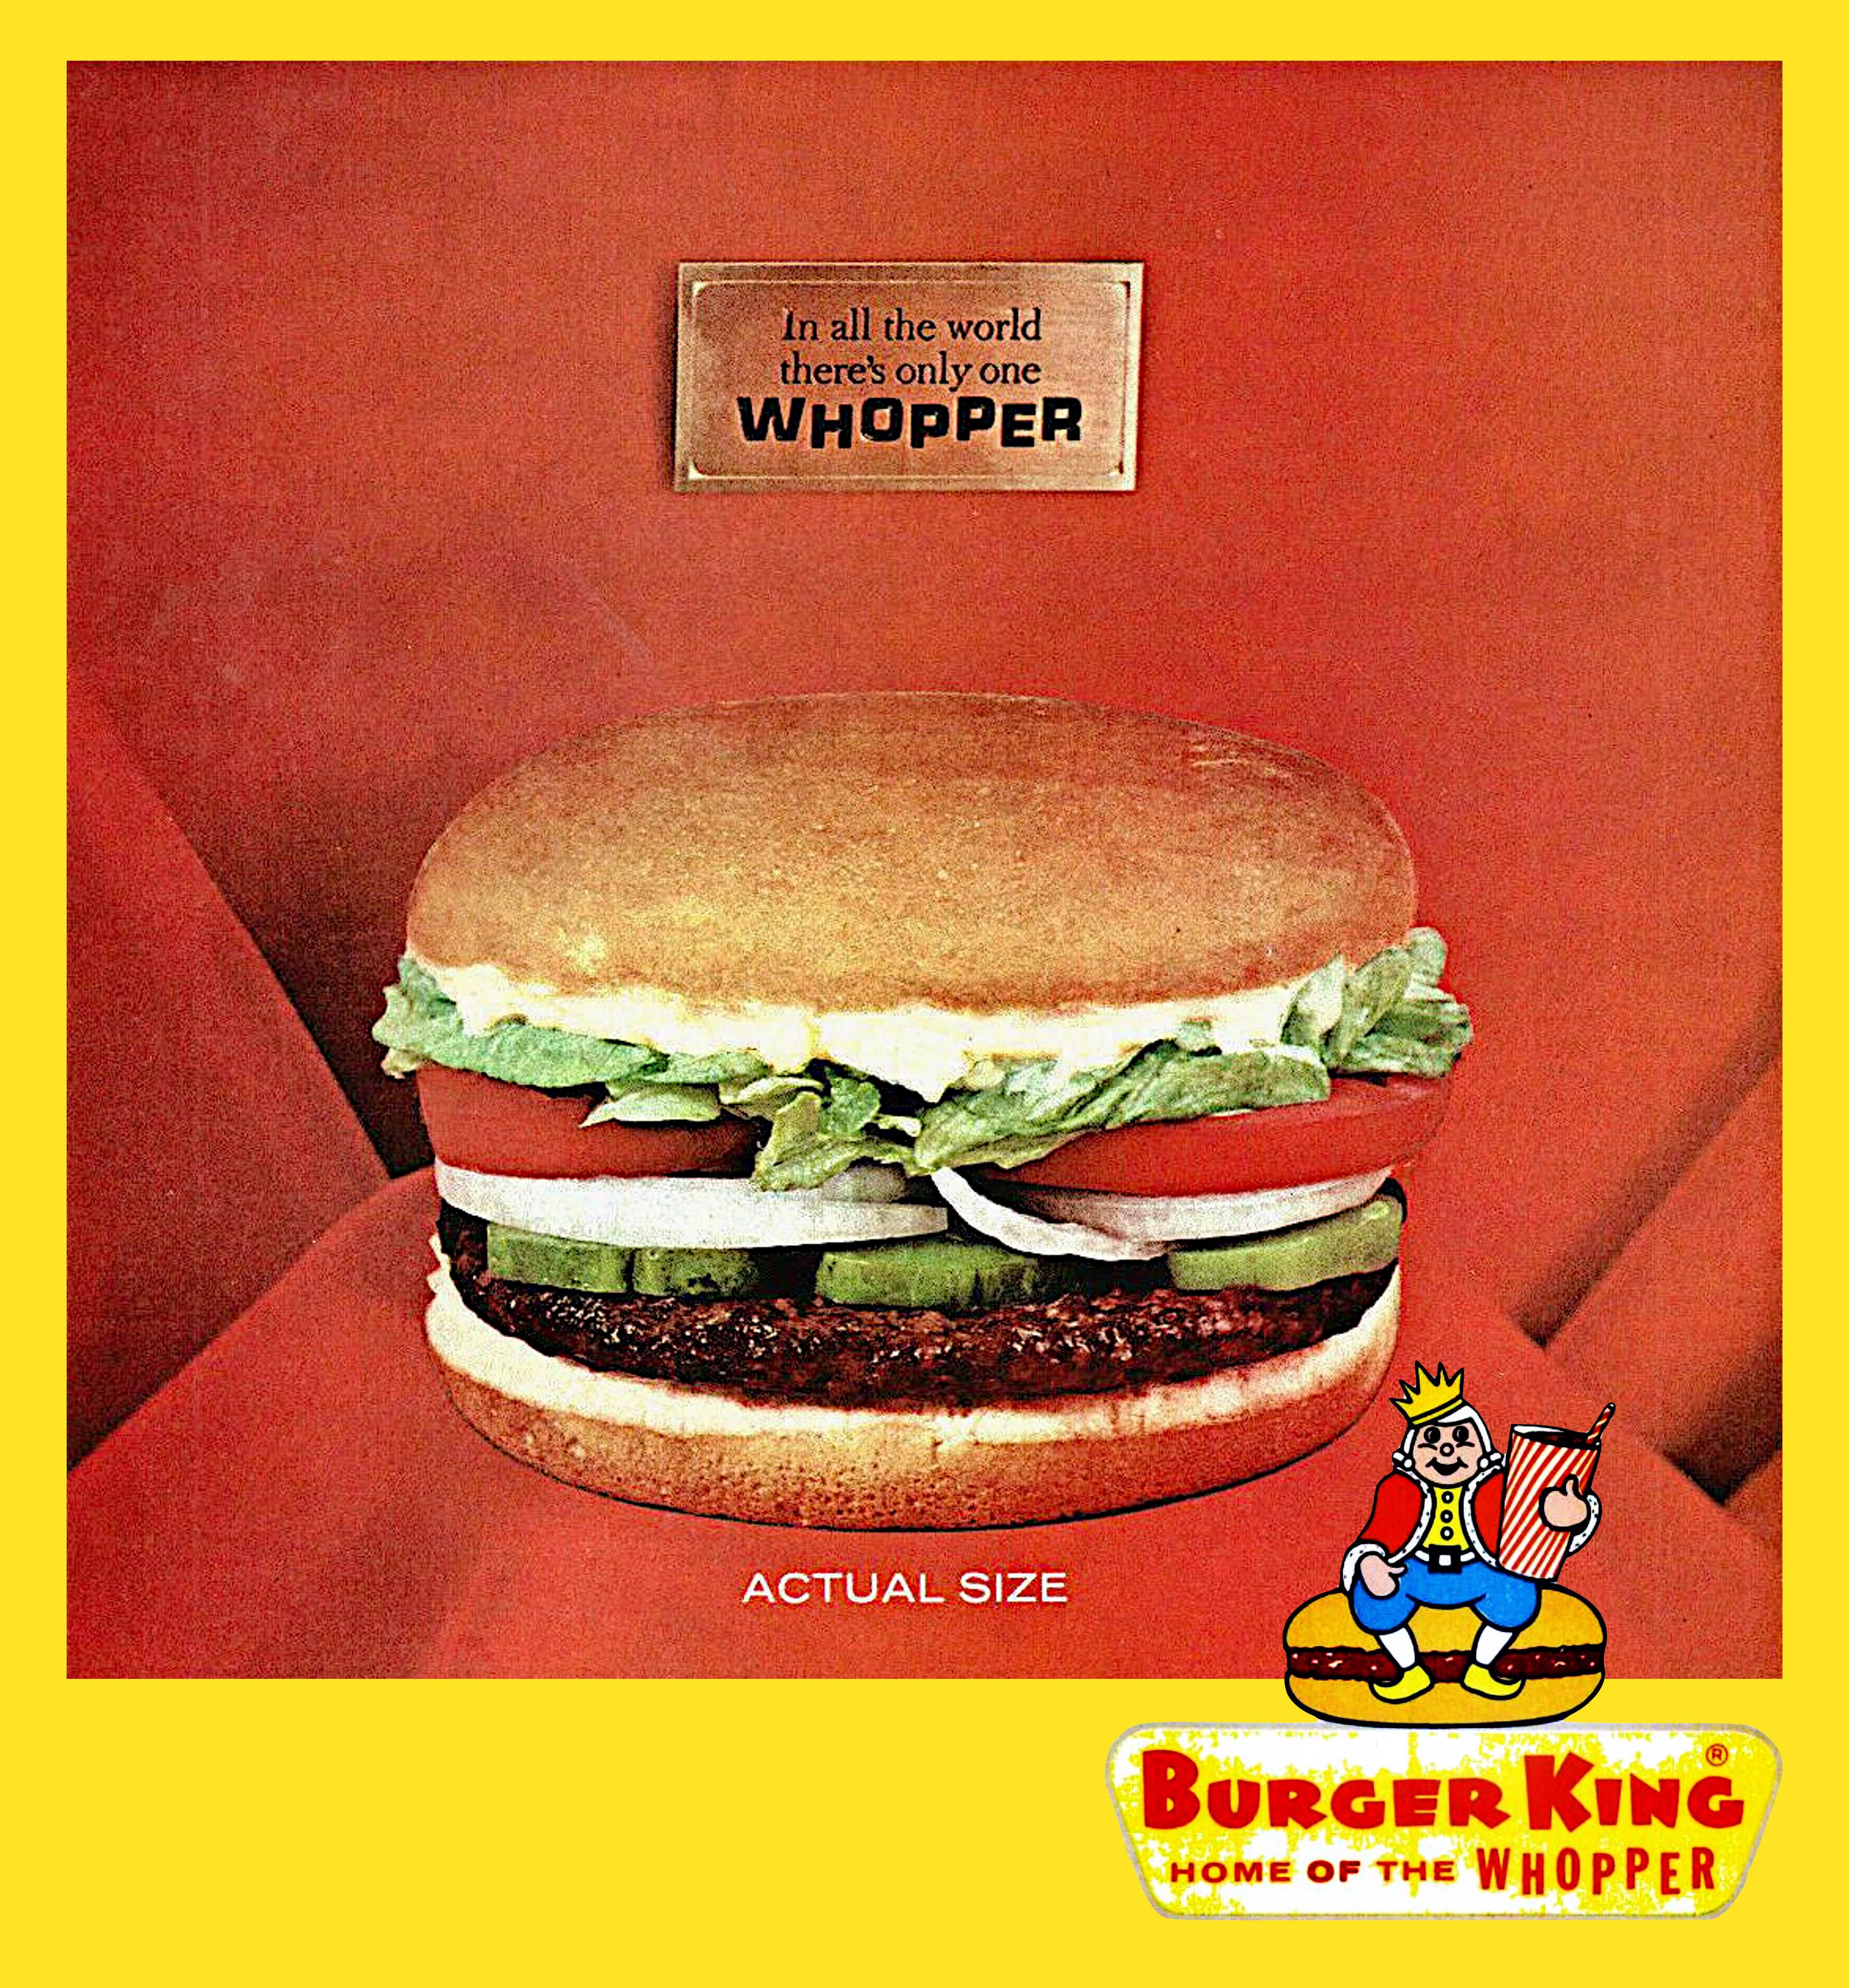 RetroNewsNow on X: In 1957, Burger King introduced the Whopper